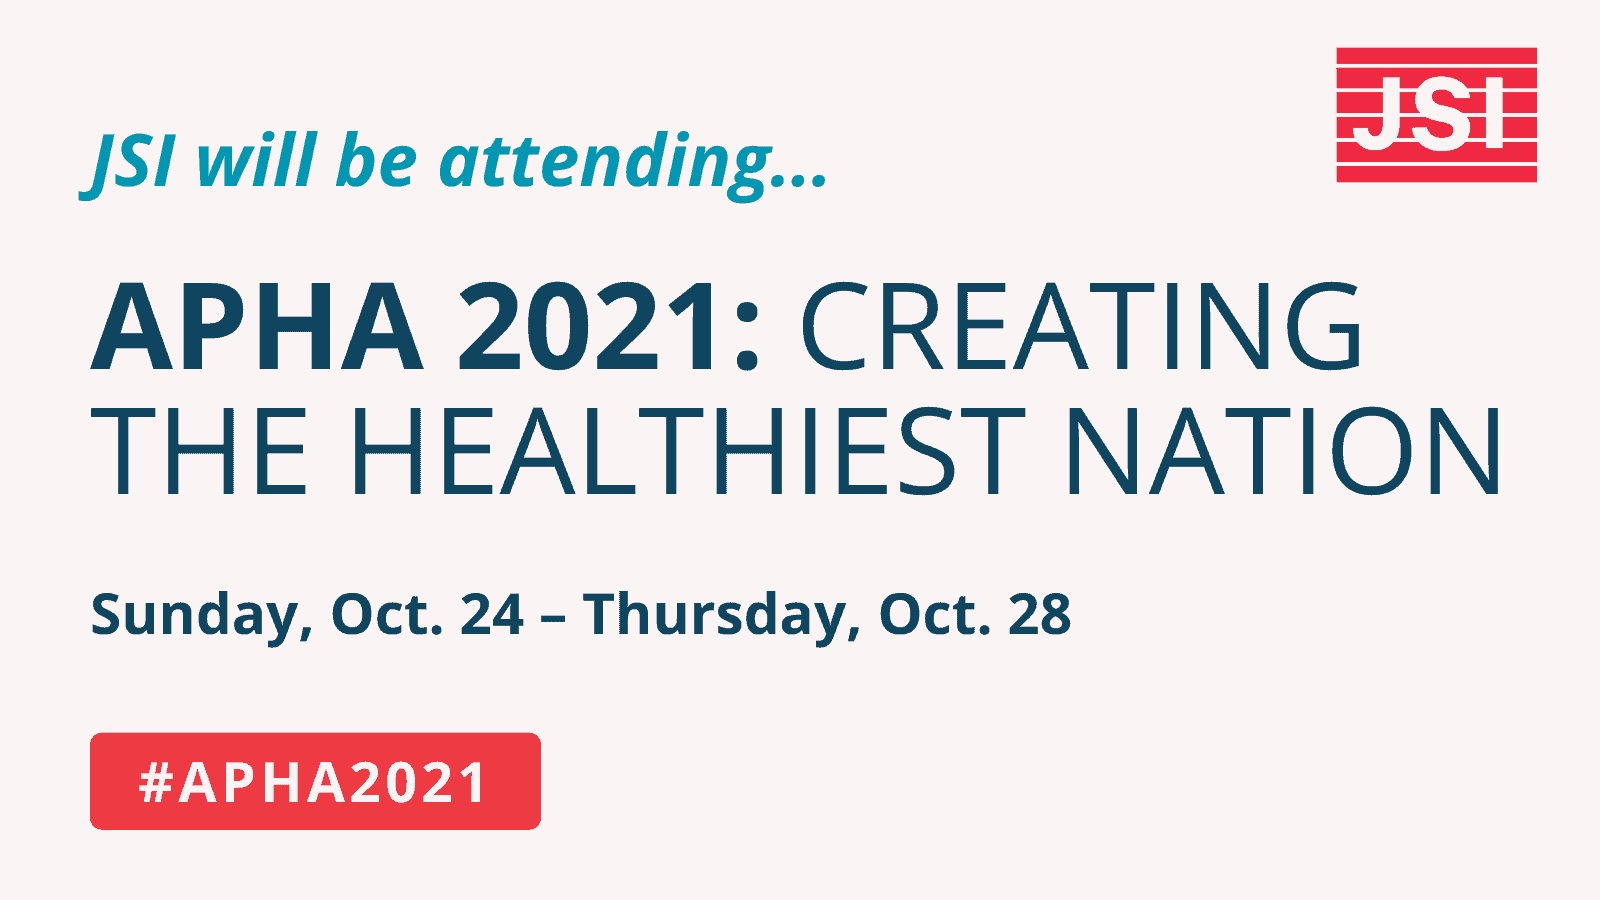 #APHA2021: Creating the Healthiest Nation